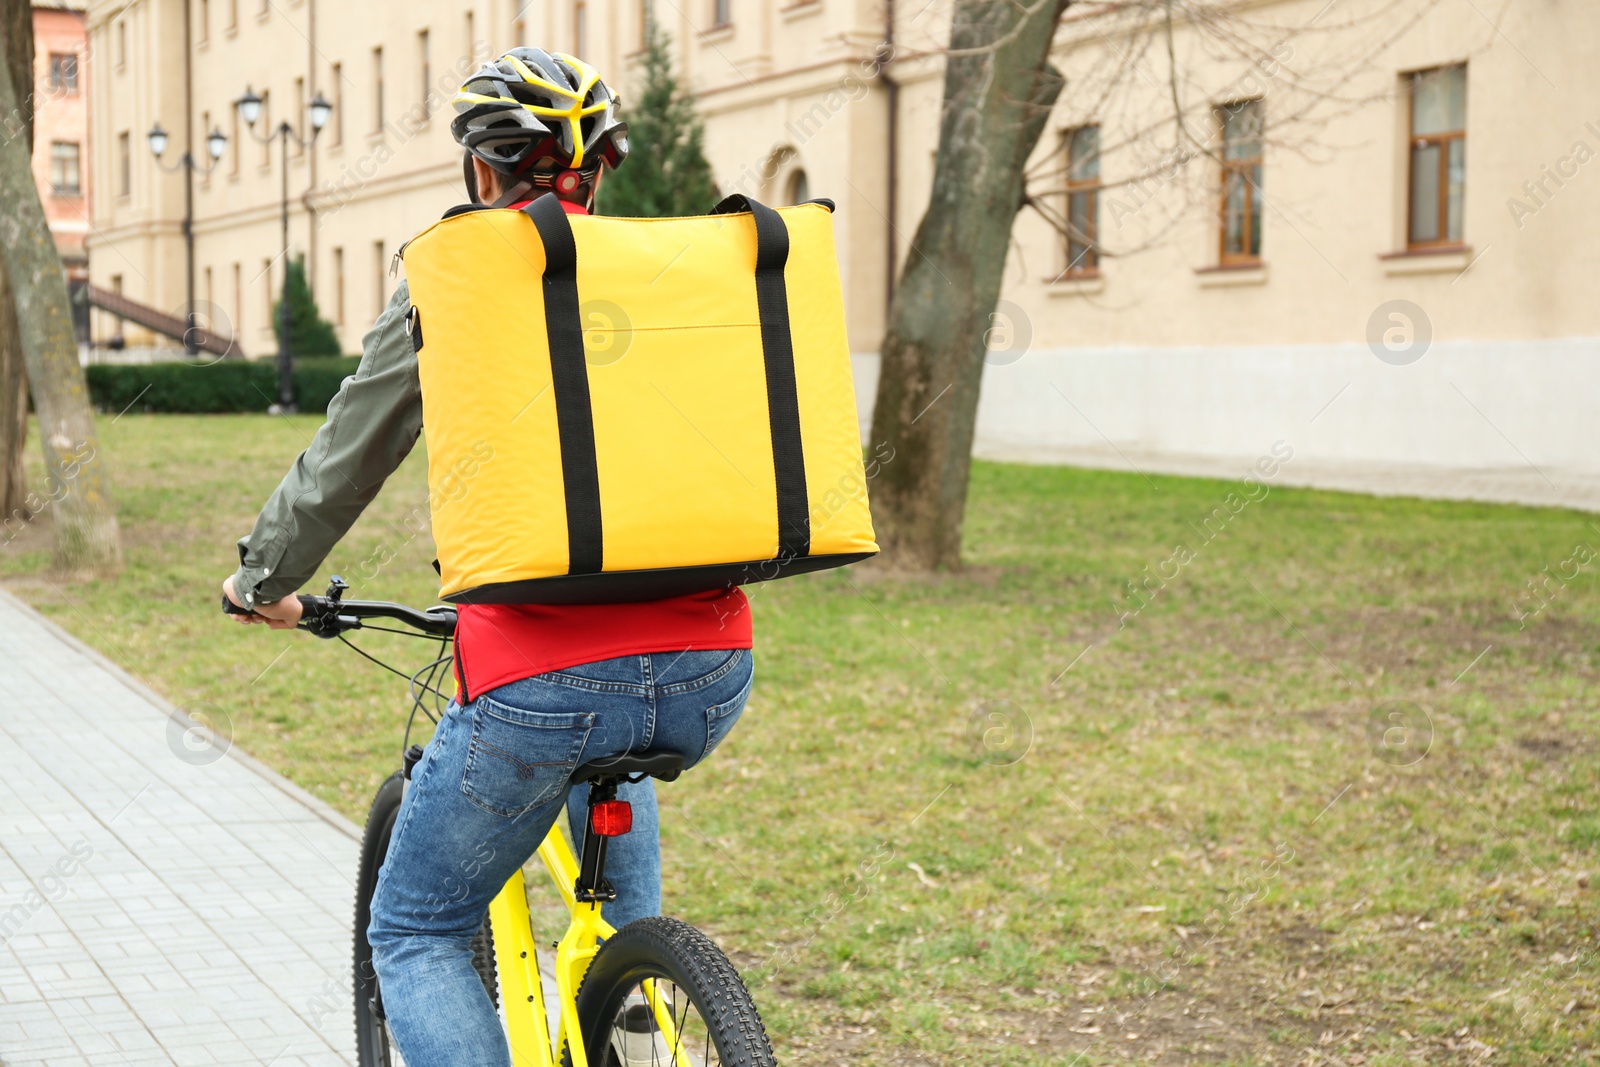 Photo of Courier with thermo bag riding bicycle outdoors. Food delivery service